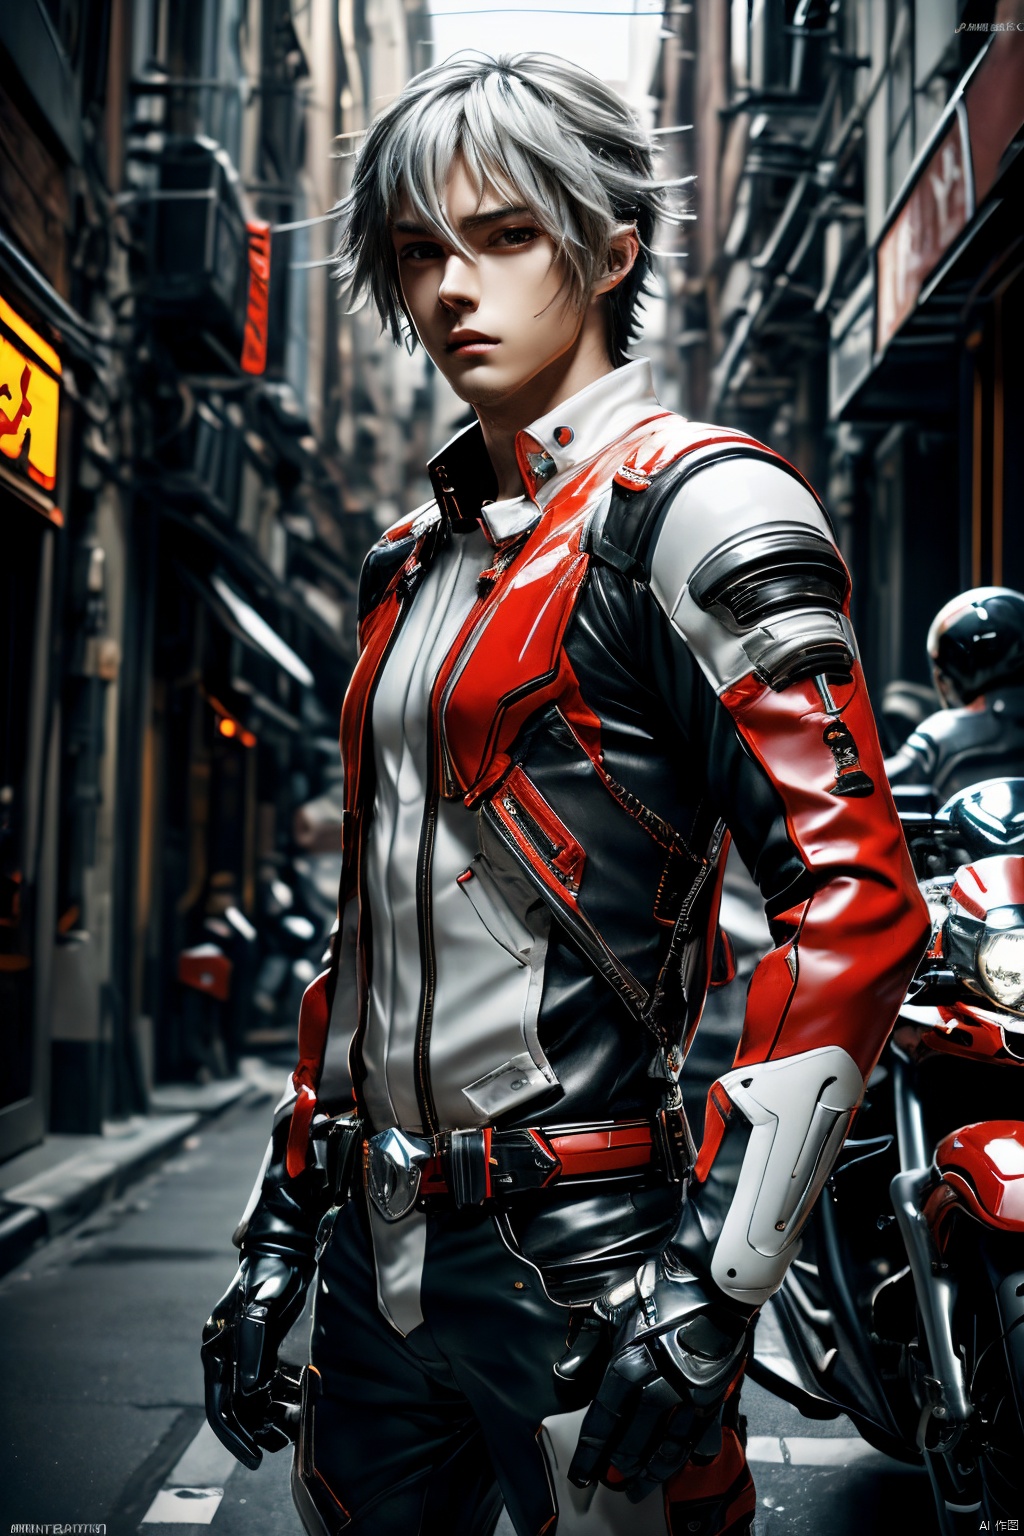  anime style, A cool young man, handsome, motorcycle, short_silver_hair , male avatar, punk, Dragon element, Red, in the style of anime-inspired characters, richly layered, gray and crimson, close up, in the style of anime art, anime artwork